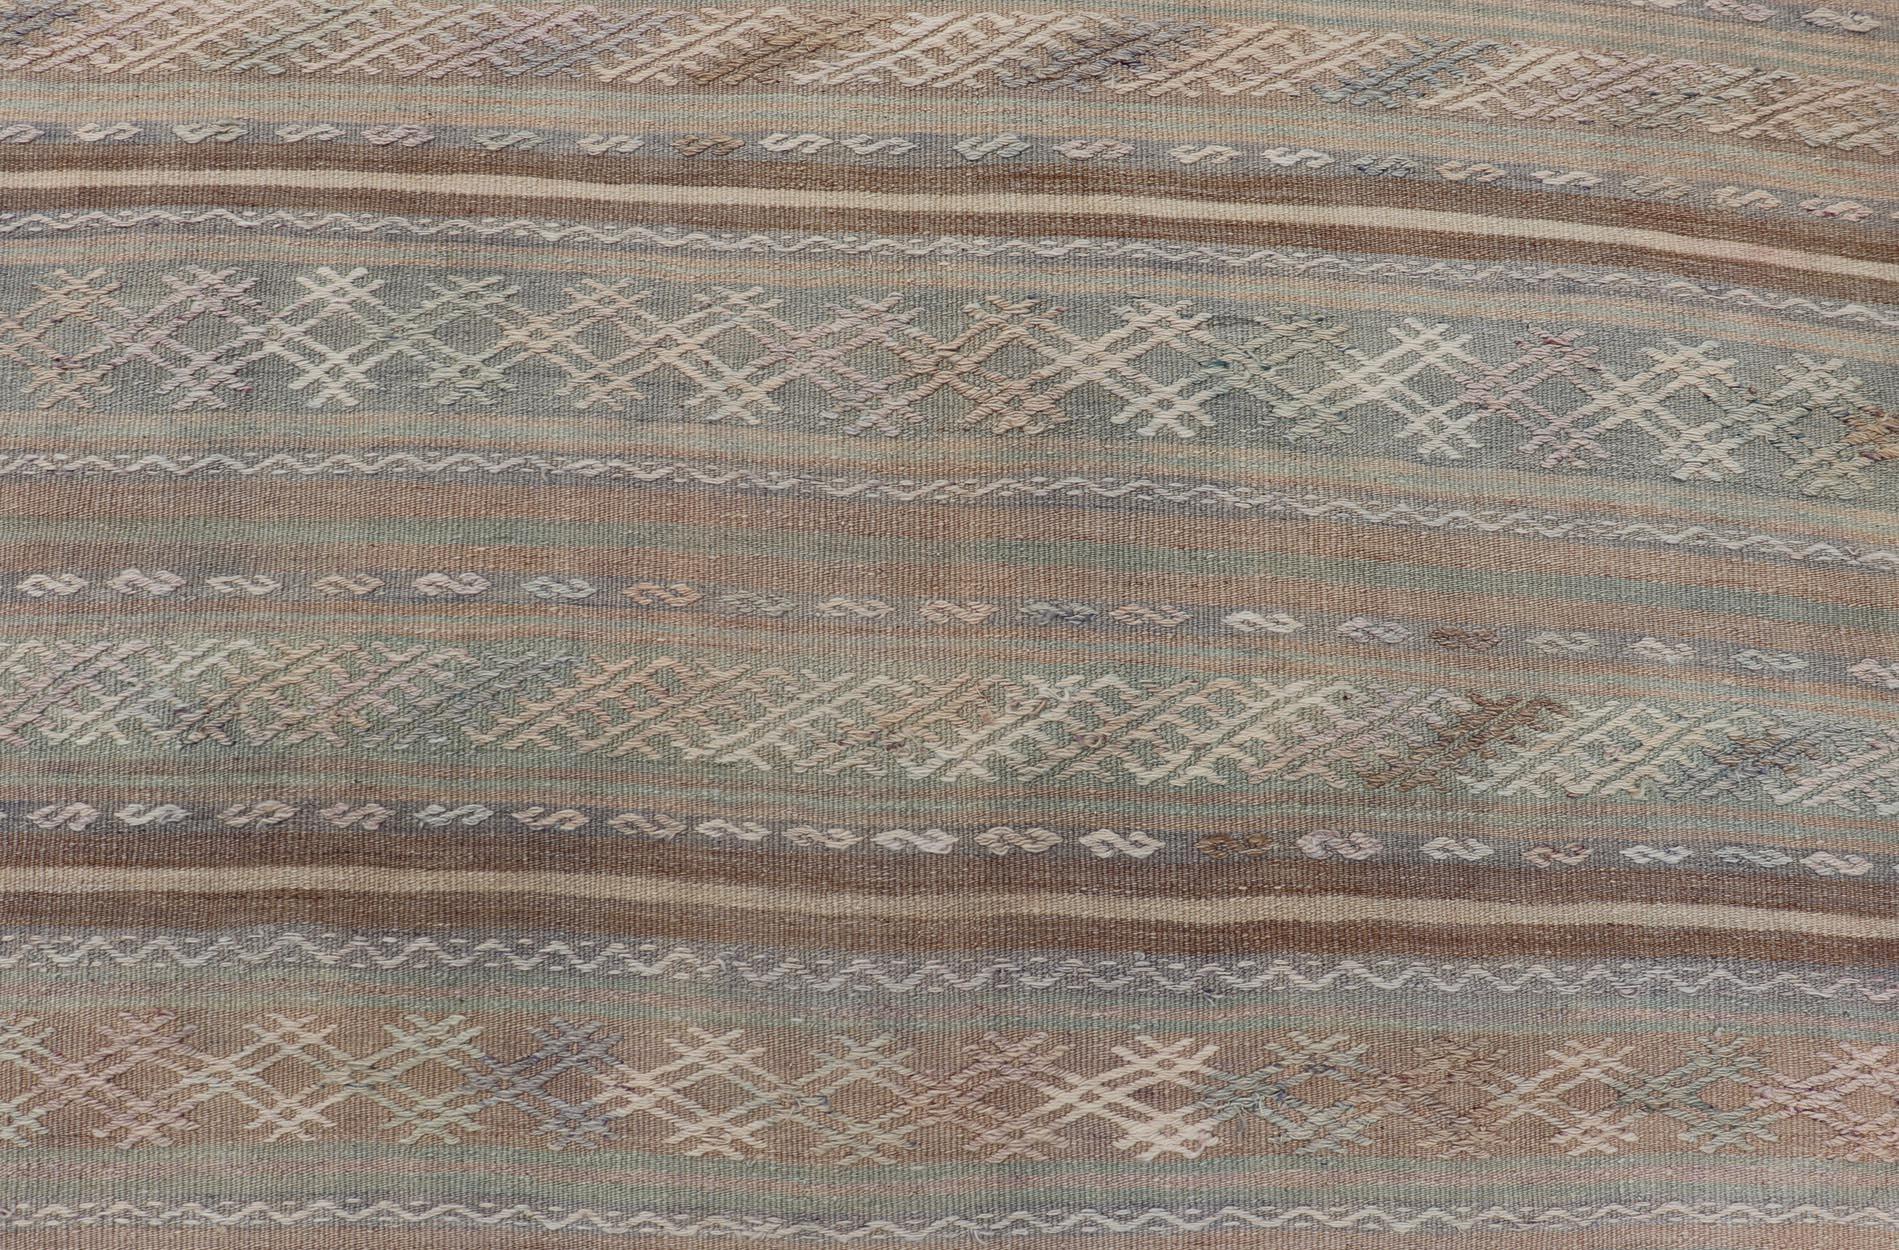 Vintage Turkish Flat-Weave Kilim with Embroideries in Muted Tones and Stripes 3